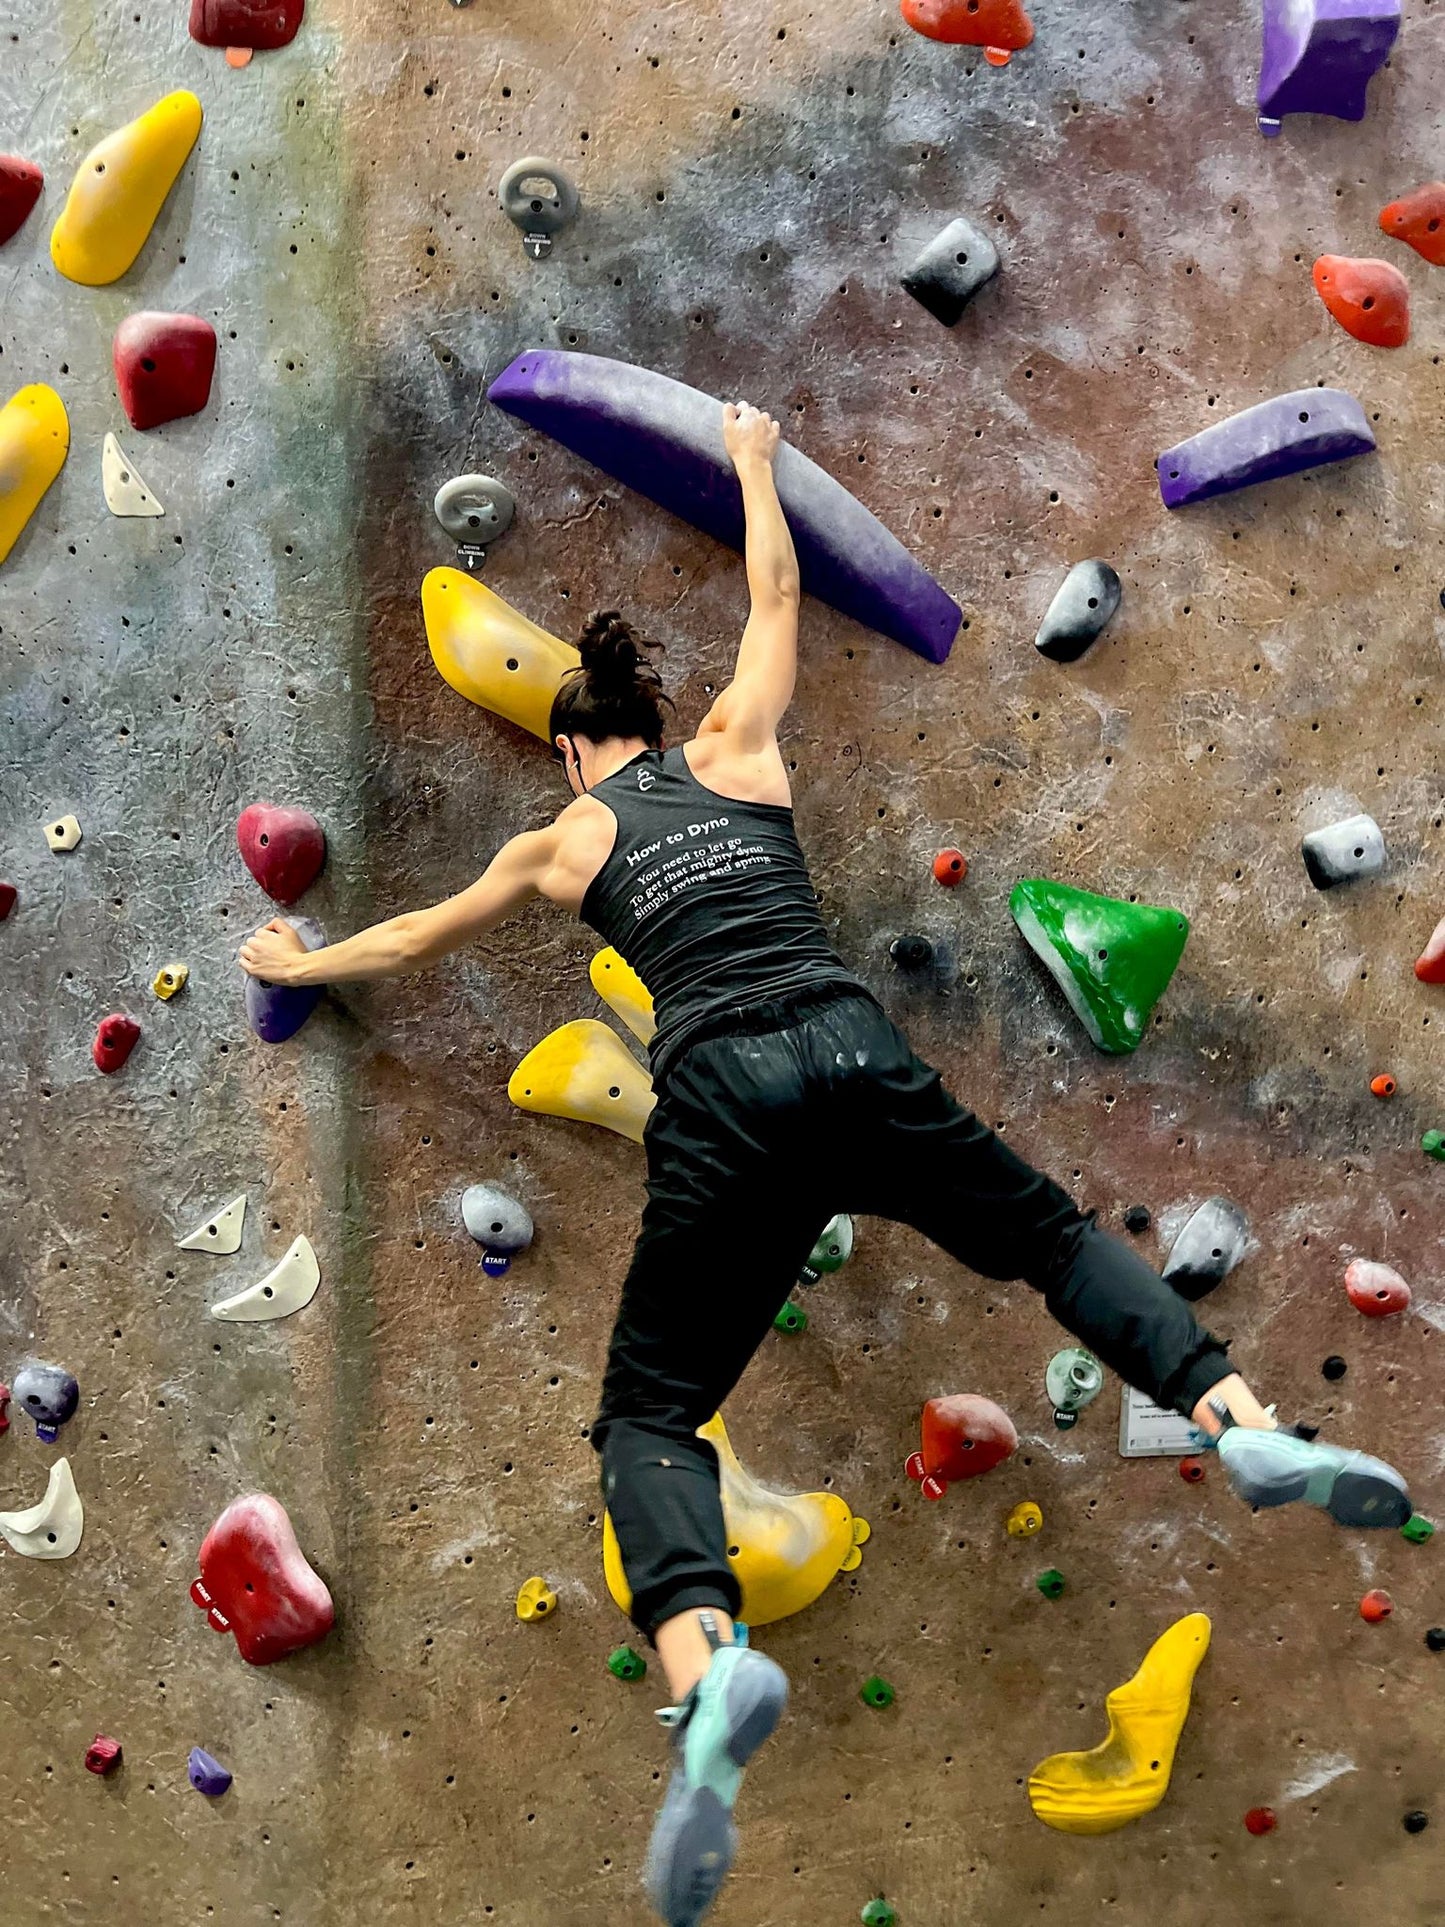 Charcoal black tank top shirt with How to Dyno haiku on the back worn by female bouldering on a climbing wall in the gym